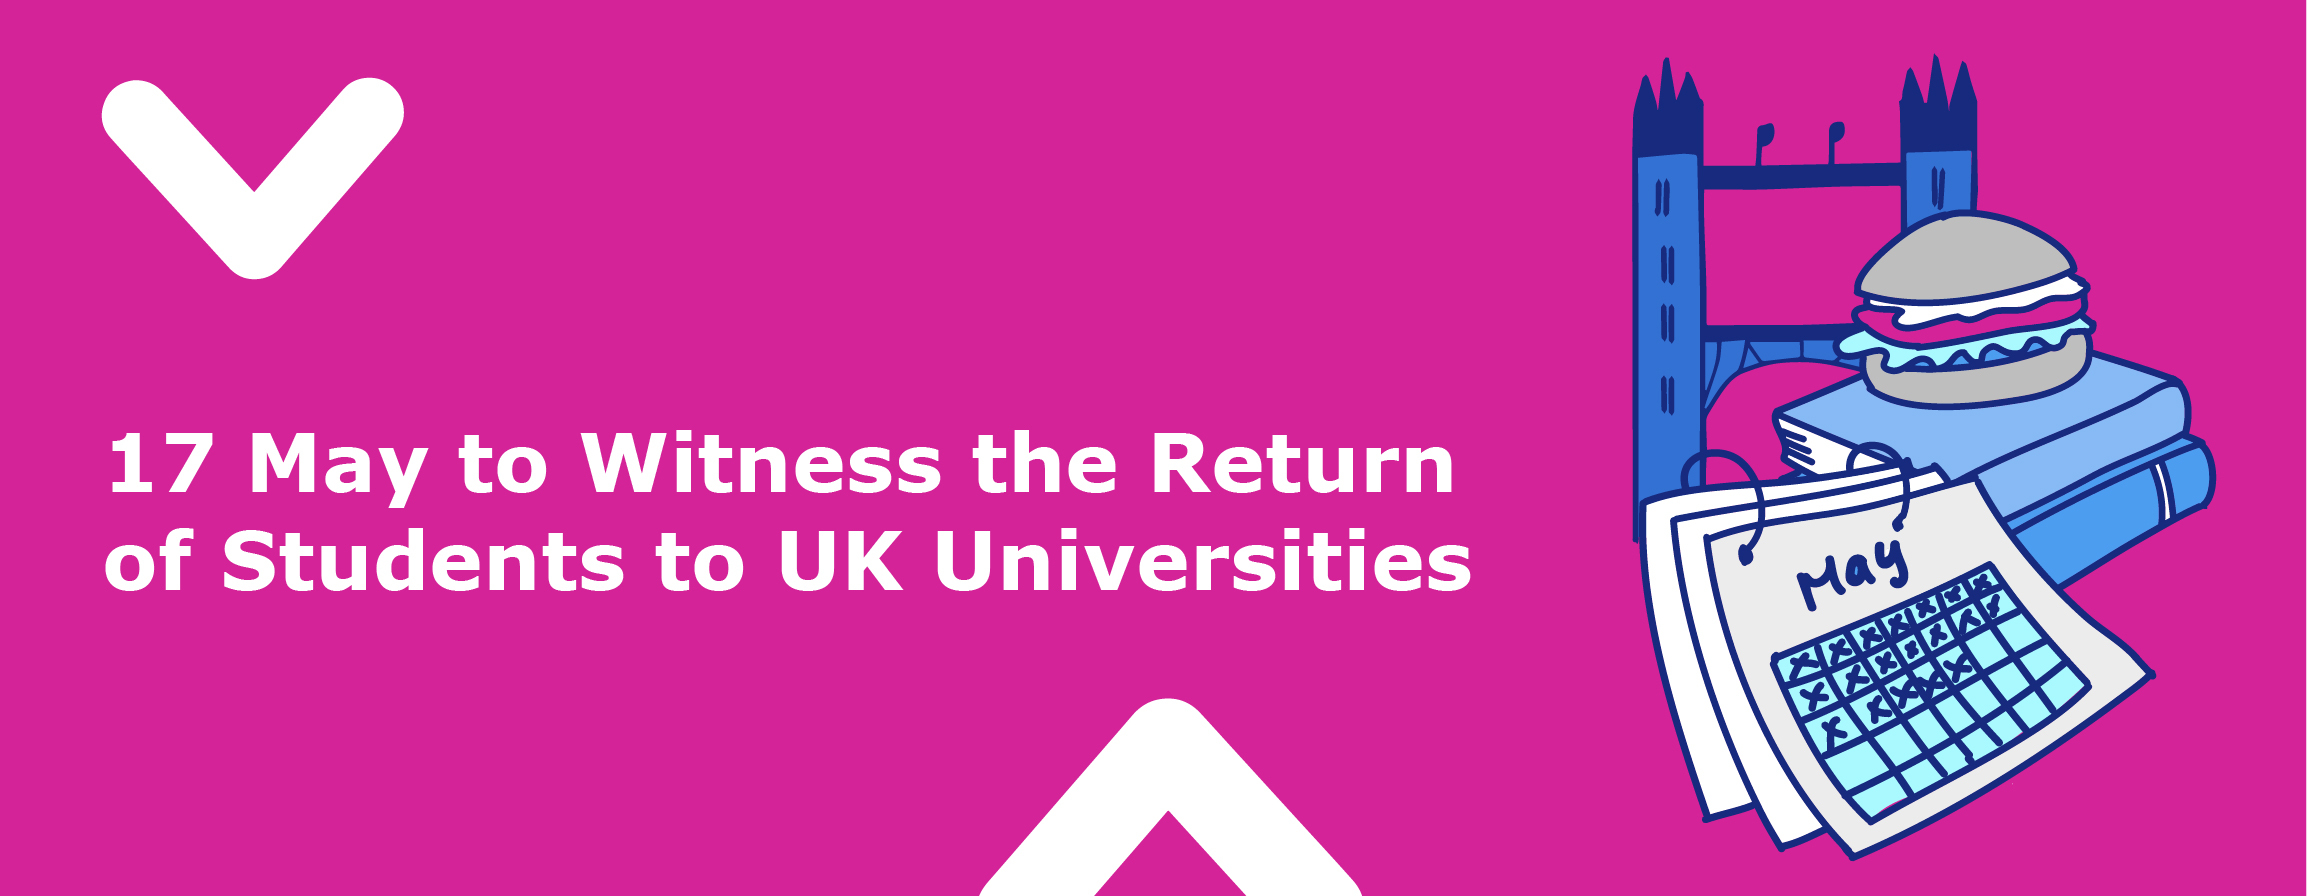 17 May to Witness the Return of Students to UK Universities